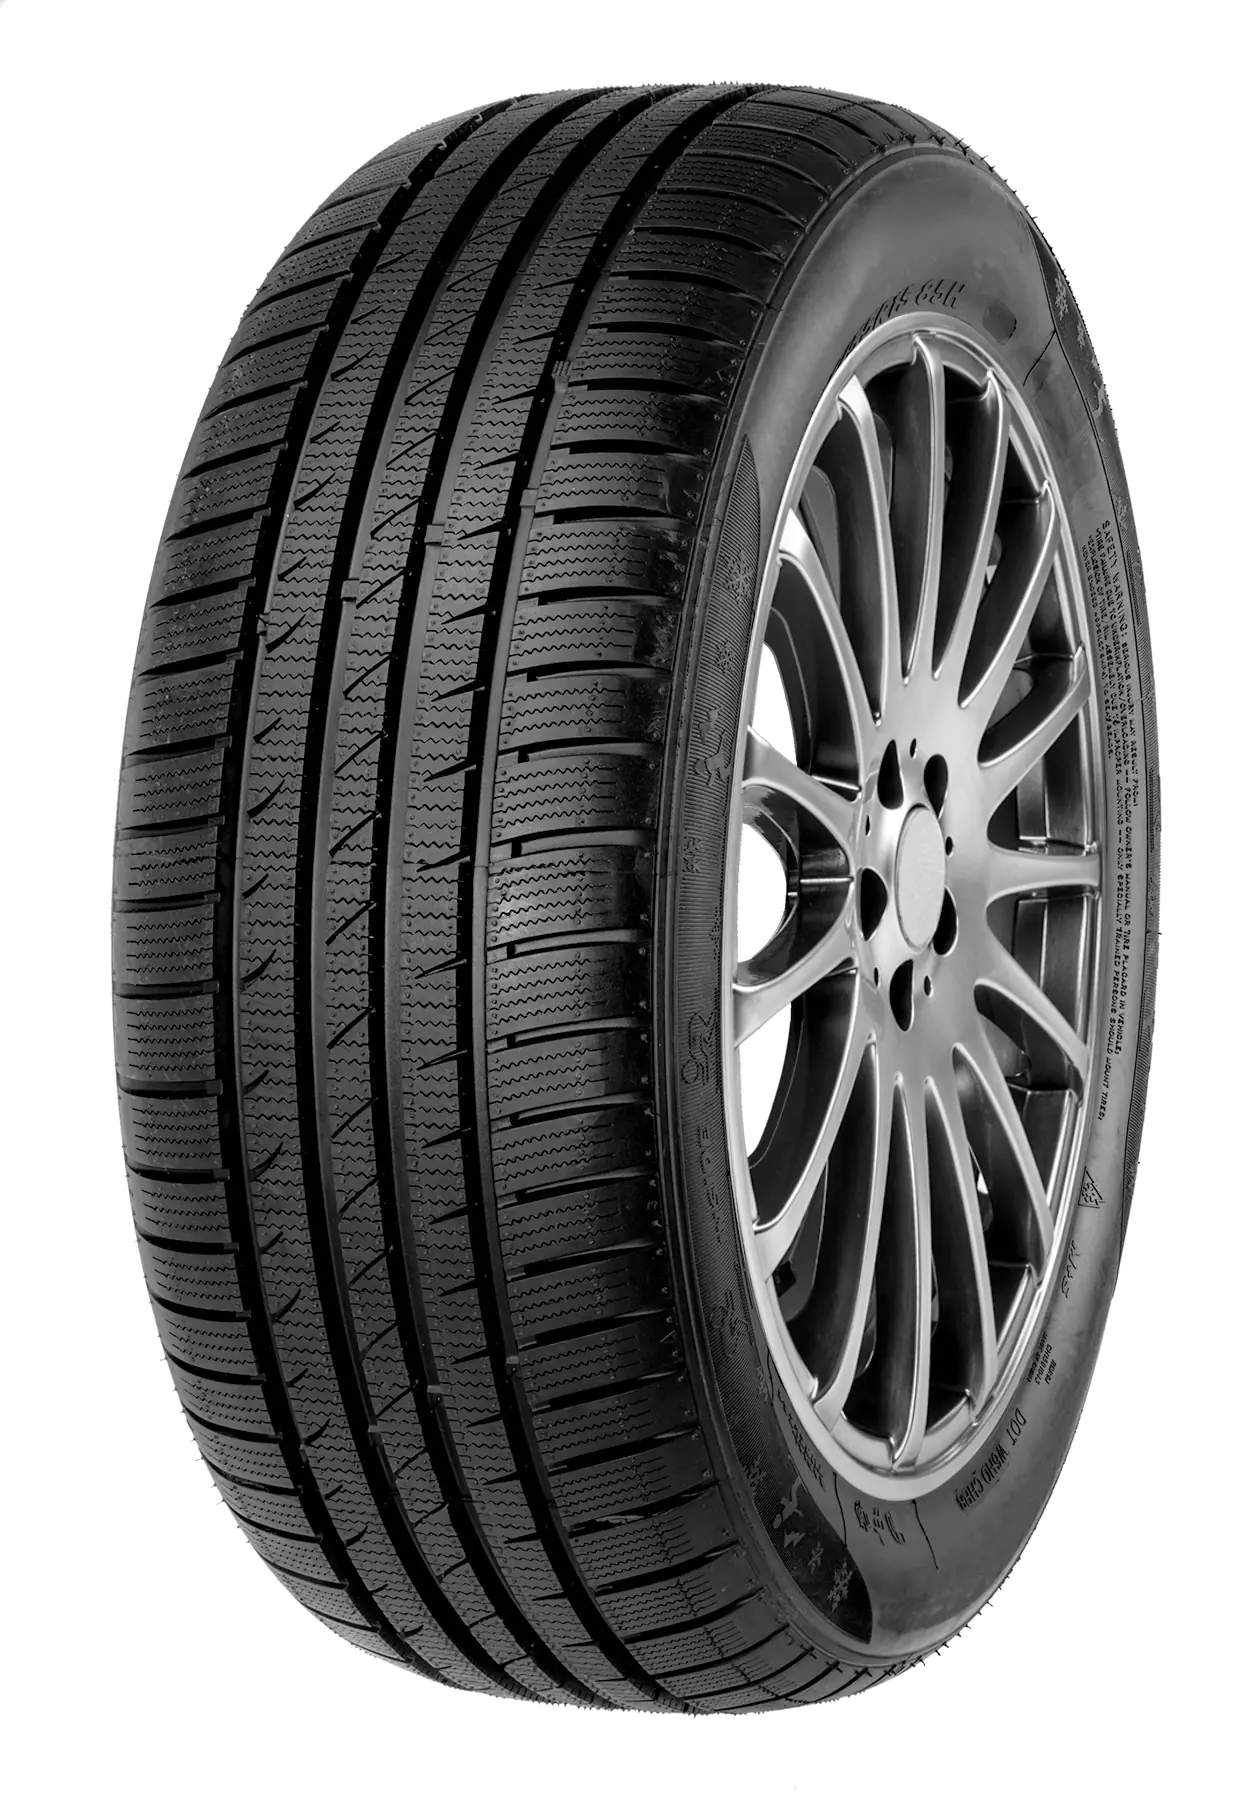 Gomme Autovettura Atlas 215/55 R17 98H POLARBEAR UHP XL M+S Invernale